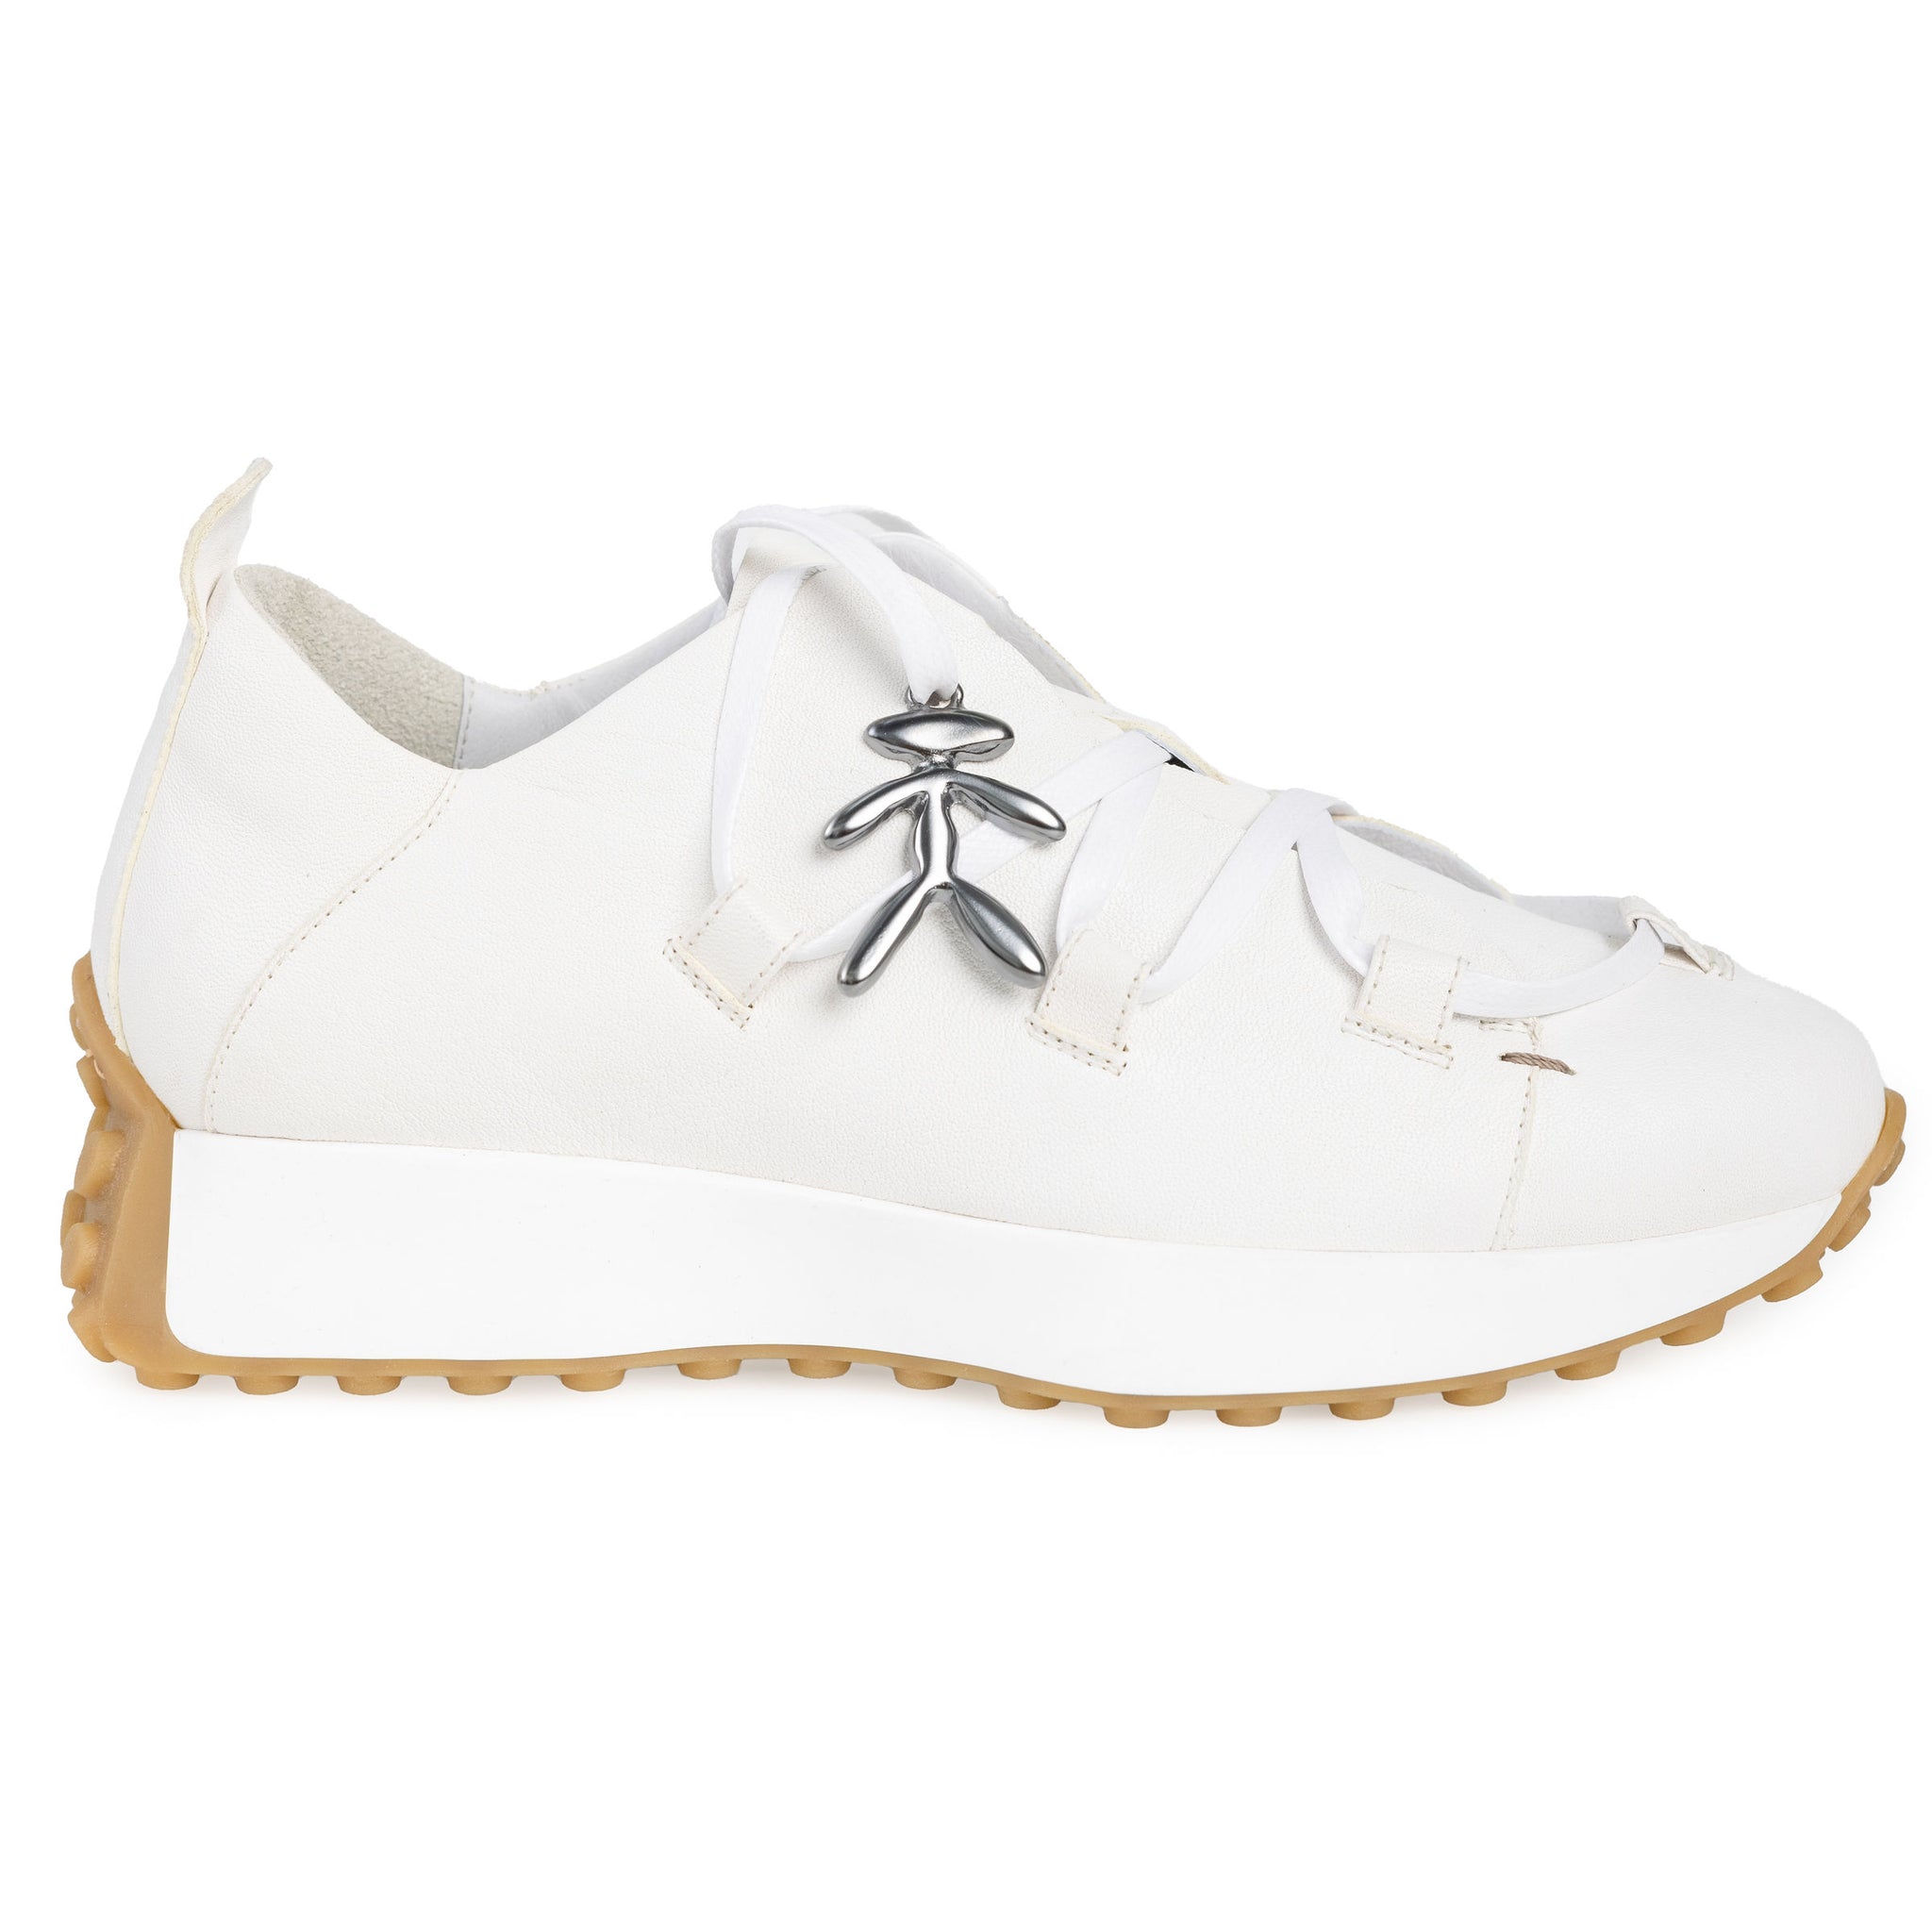 HENRY BEGUELIN Old Iron Leather Sneaker in Bianco